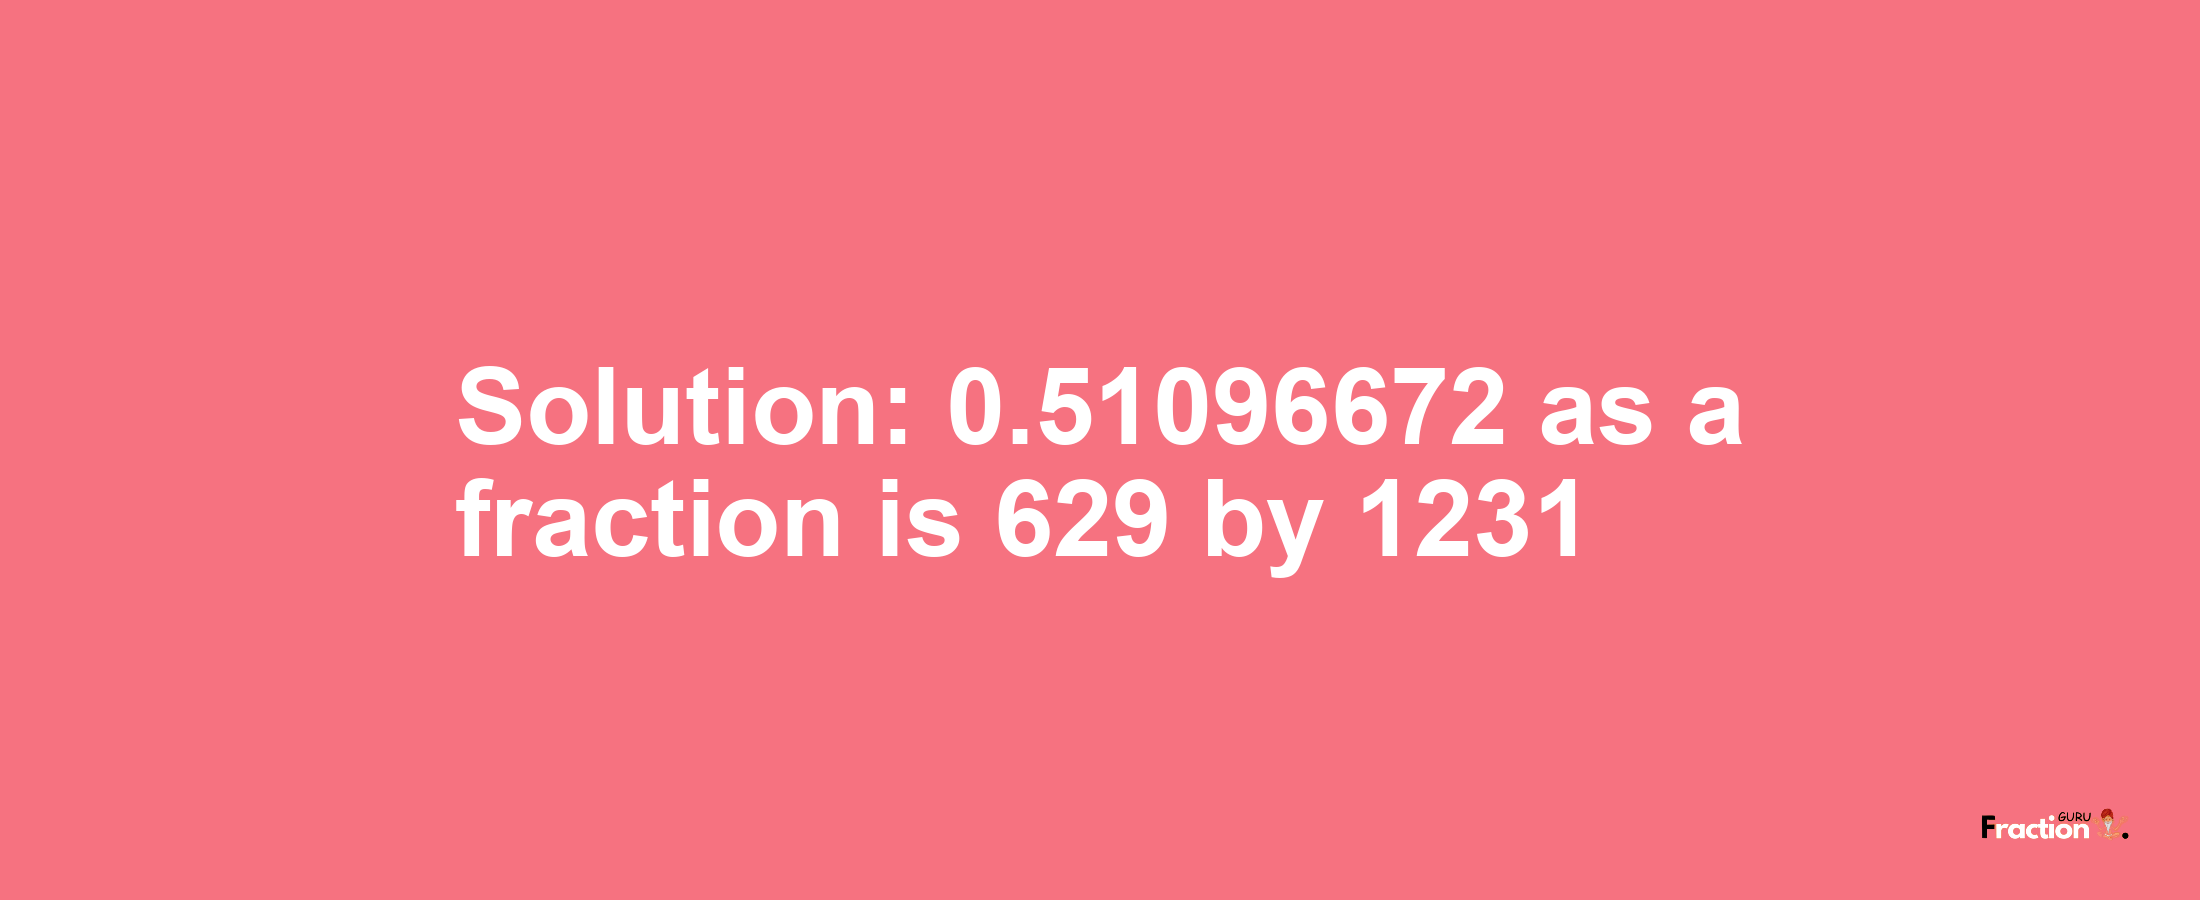 Solution:0.51096672 as a fraction is 629/1231